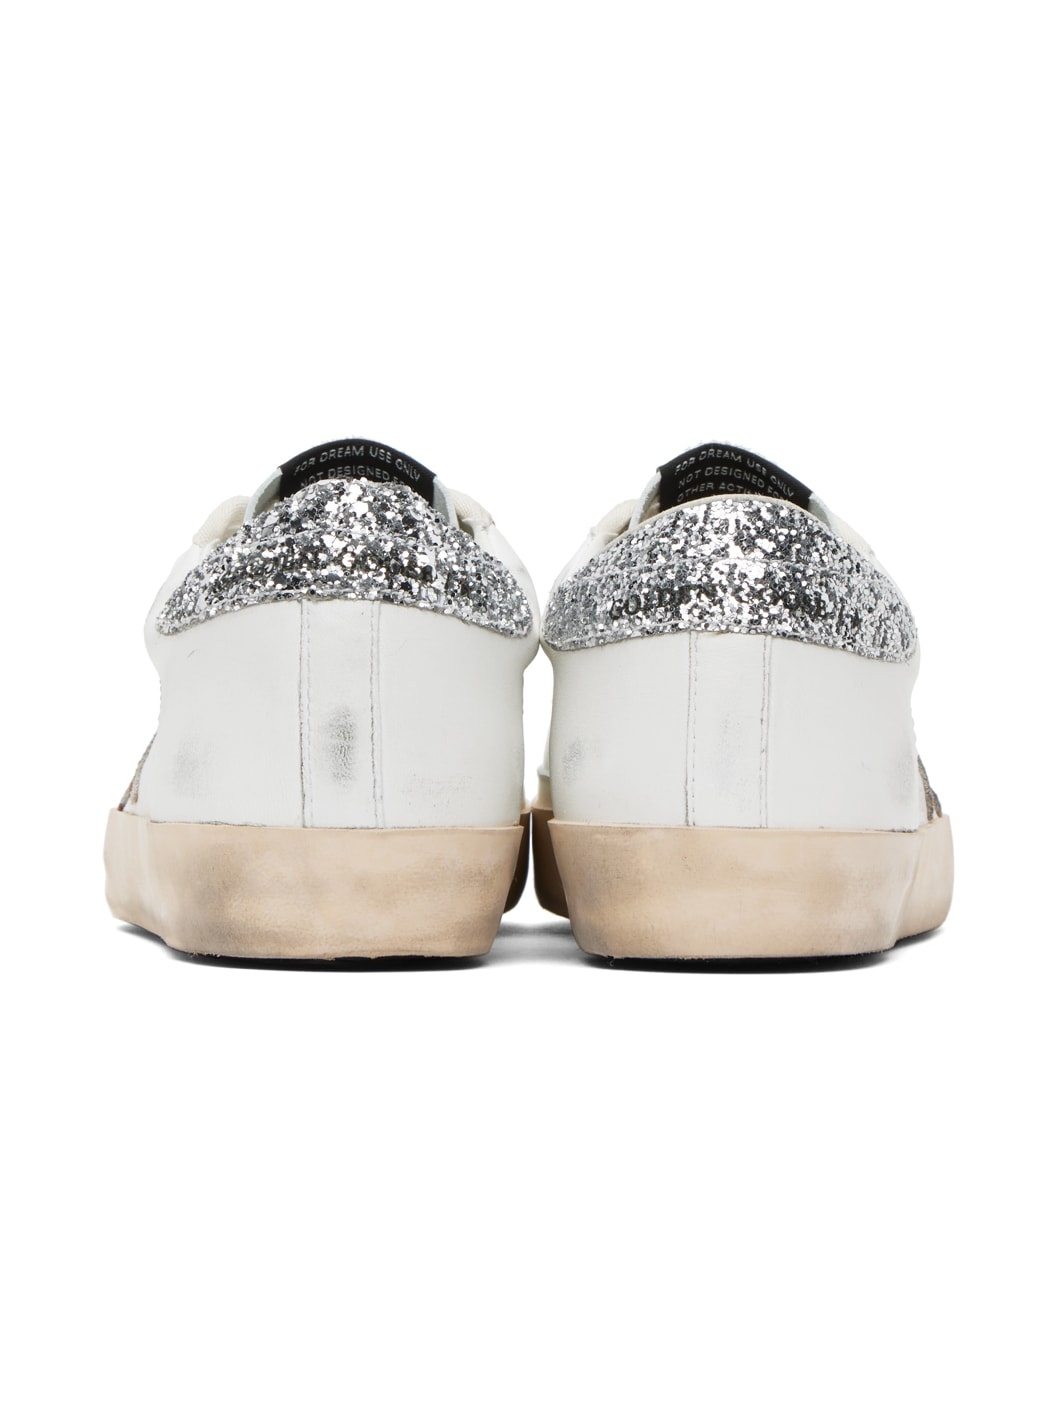 SSENSE Exclusive White Limited Edition Superstar Sneakers - 2